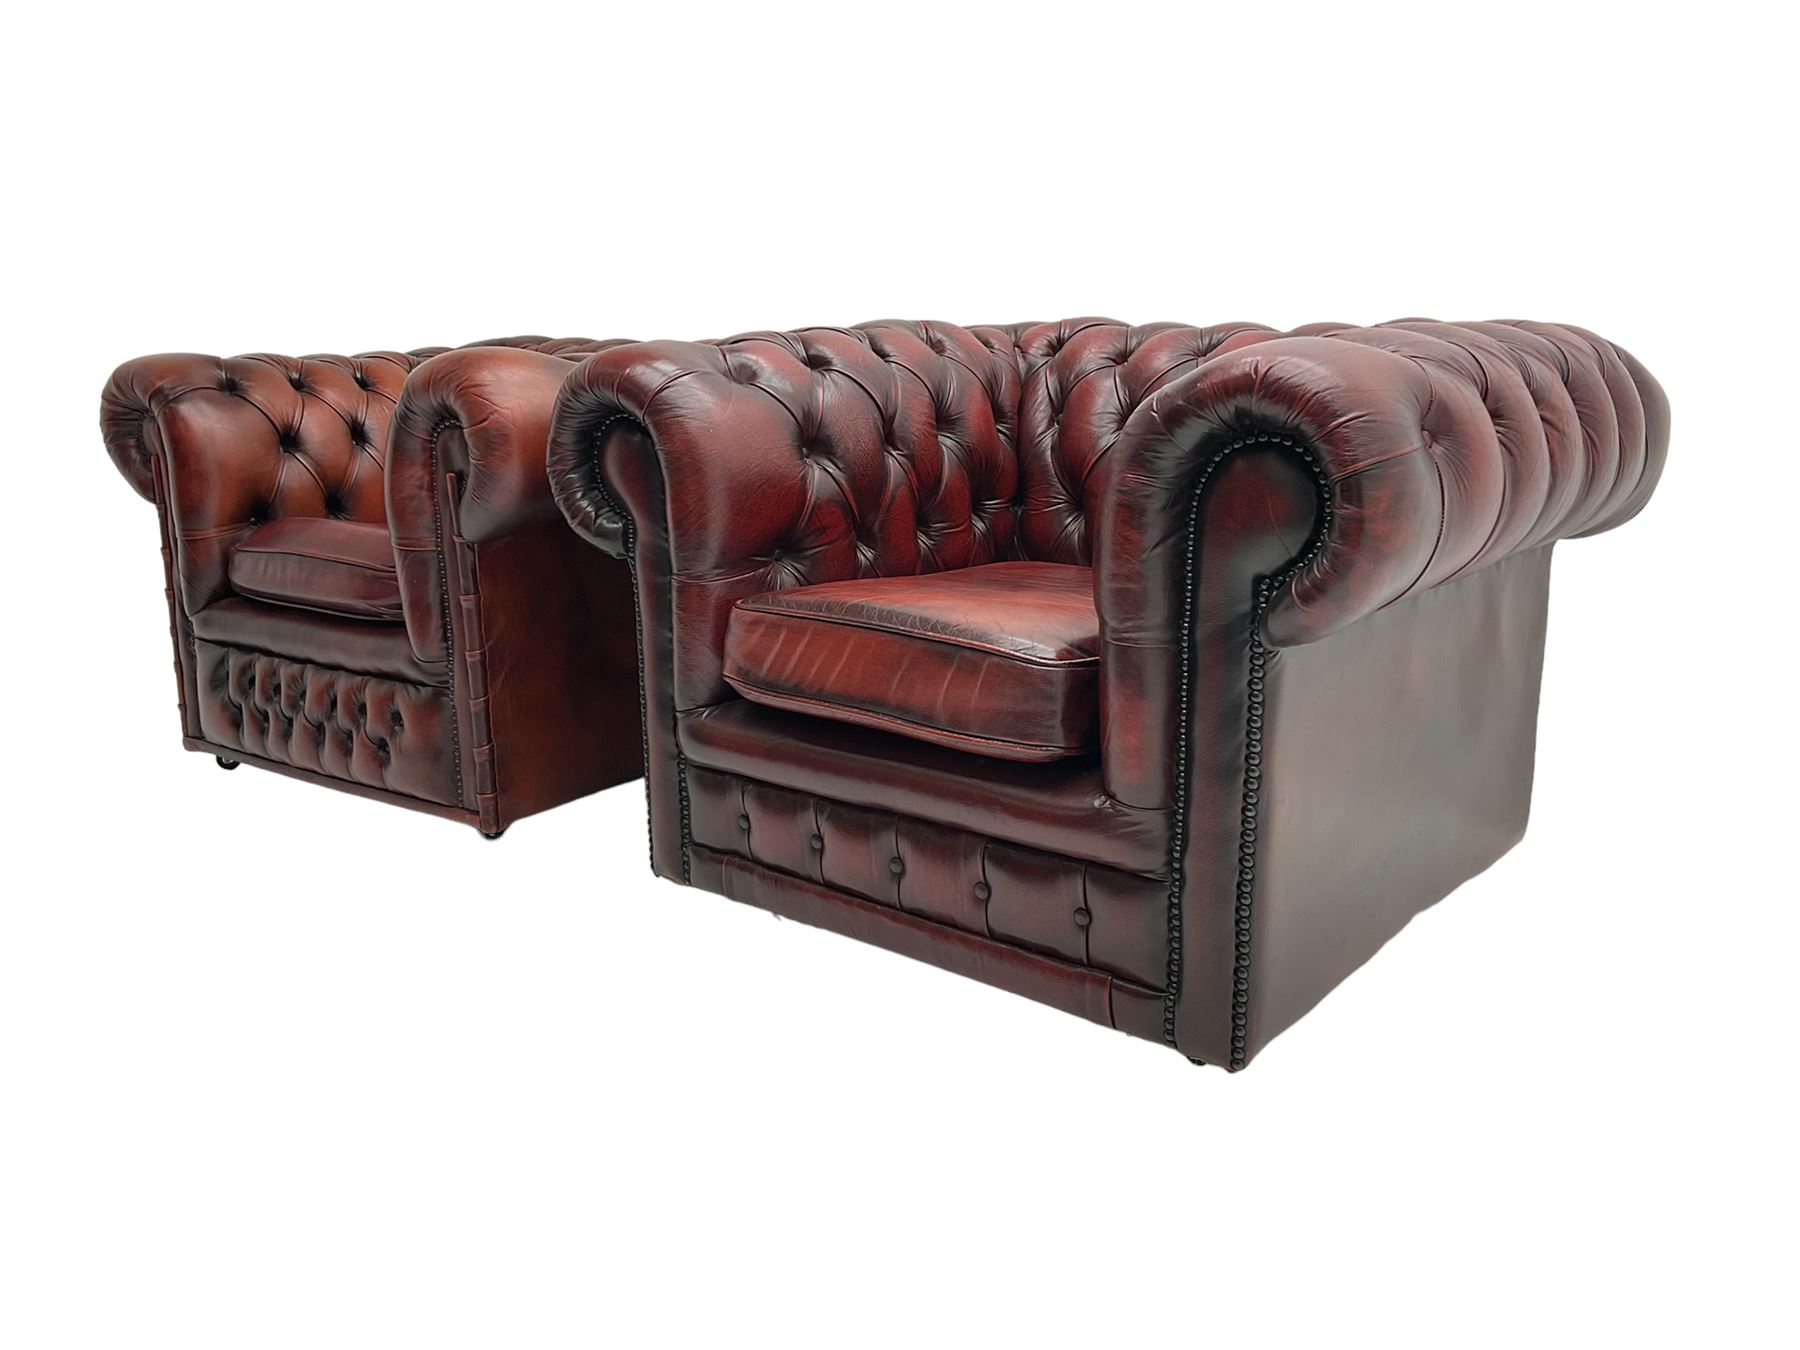 Pair chesterfield armchairs in oxblood leather - Image 5 of 7